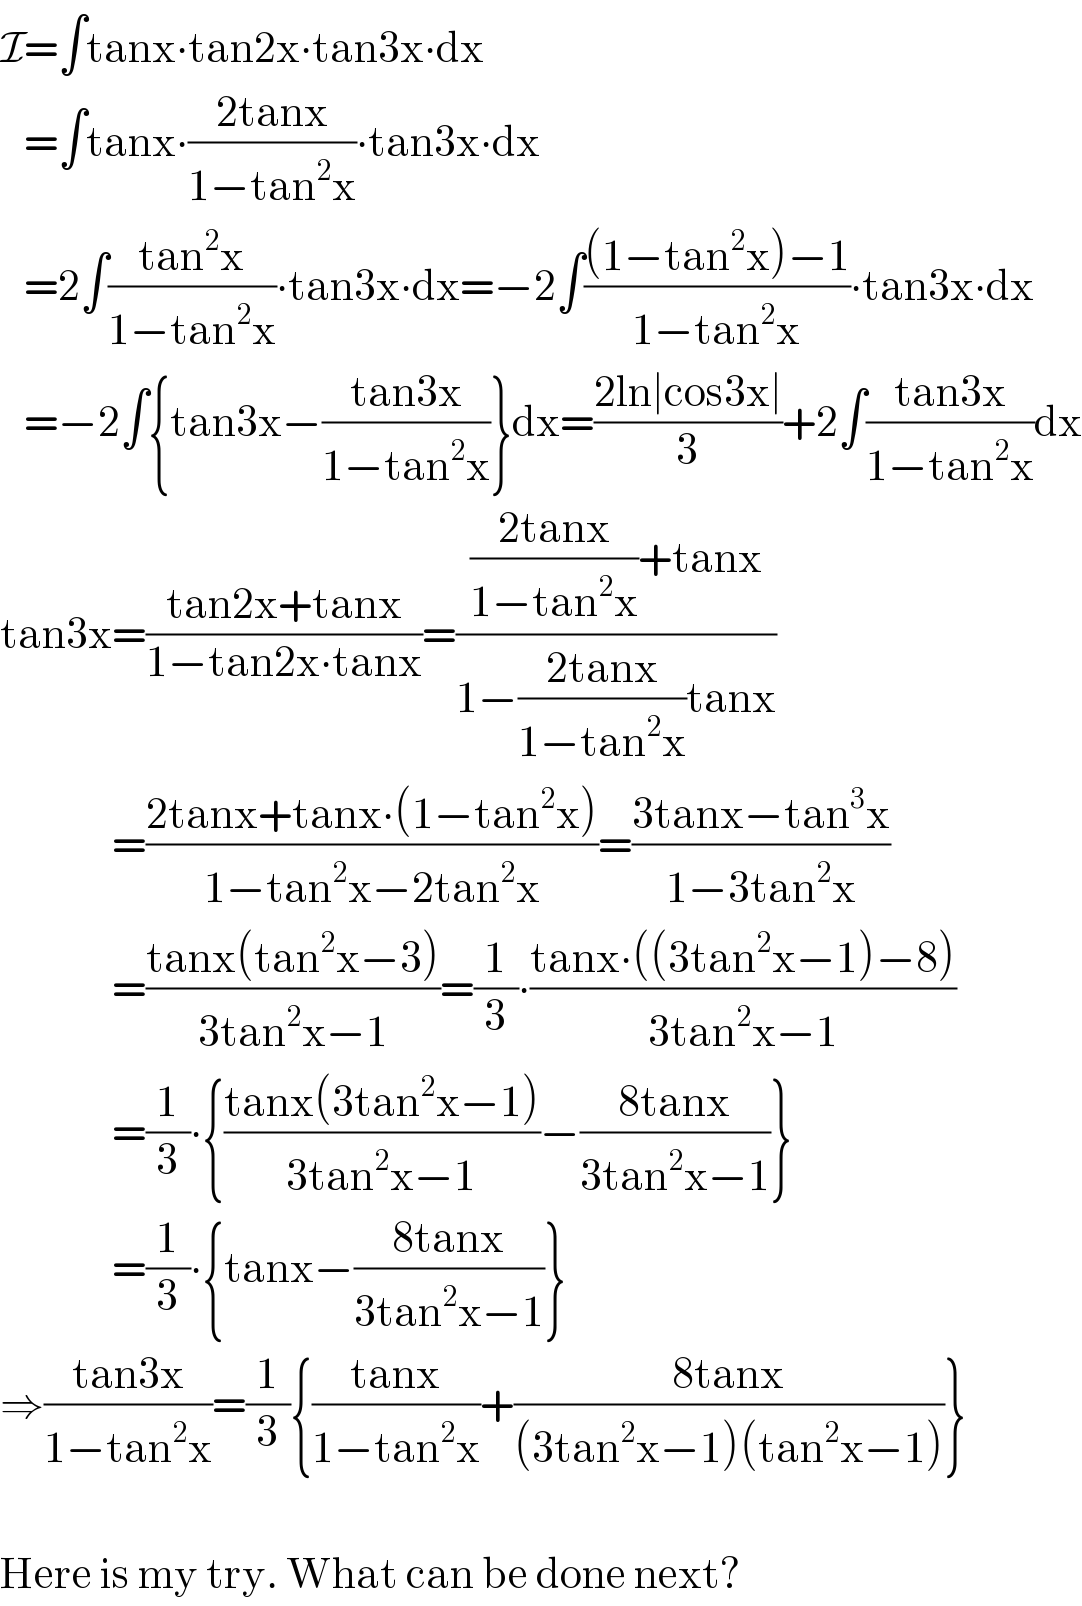 I=∫tanx∙tan2x∙tan3x∙dx     =∫tanx∙((2tanx)/(1−tan^2 x))∙tan3x∙dx     =2∫((tan^2 x)/(1−tan^2 x))∙tan3x∙dx=−2∫(((1−tan^2 x)−1)/(1−tan^2 x))∙tan3x∙dx     =−2∫{tan3x−((tan3x)/(1−tan^2 x))}dx=((2ln∣cos3x∣)/3)+2∫((tan3x)/(1−tan^2 x))dx  tan3x=((tan2x+tanx)/(1−tan2x∙tanx))=((((2tanx)/(1−tan^2 x))+tanx)/(1−((2tanx)/(1−tan^2 x))tanx))                =((2tanx+tanx∙(1−tan^2 x))/(1−tan^2 x−2tan^2 x))=((3tanx−tan^3 x)/(1−3tan^2 x))                =((tanx(tan^2 x−3))/(3tan^2 x−1))=(1/3)∙((tanx∙((3tan^2 x−1)−8))/(3tan^2 x−1))                =(1/3)∙{((tanx(3tan^2 x−1))/(3tan^2 x−1))−((8tanx)/(3tan^2 x−1))}                =(1/3)∙{tanx−((8tanx)/(3tan^2 x−1))}  ⇒((tan3x)/(1−tan^2 x))=(1/3){((tanx)/(1−tan^2 x))+((8tanx)/((3tan^2 x−1)(tan^2 x−1)))}    Here is my try. What can be done next?  